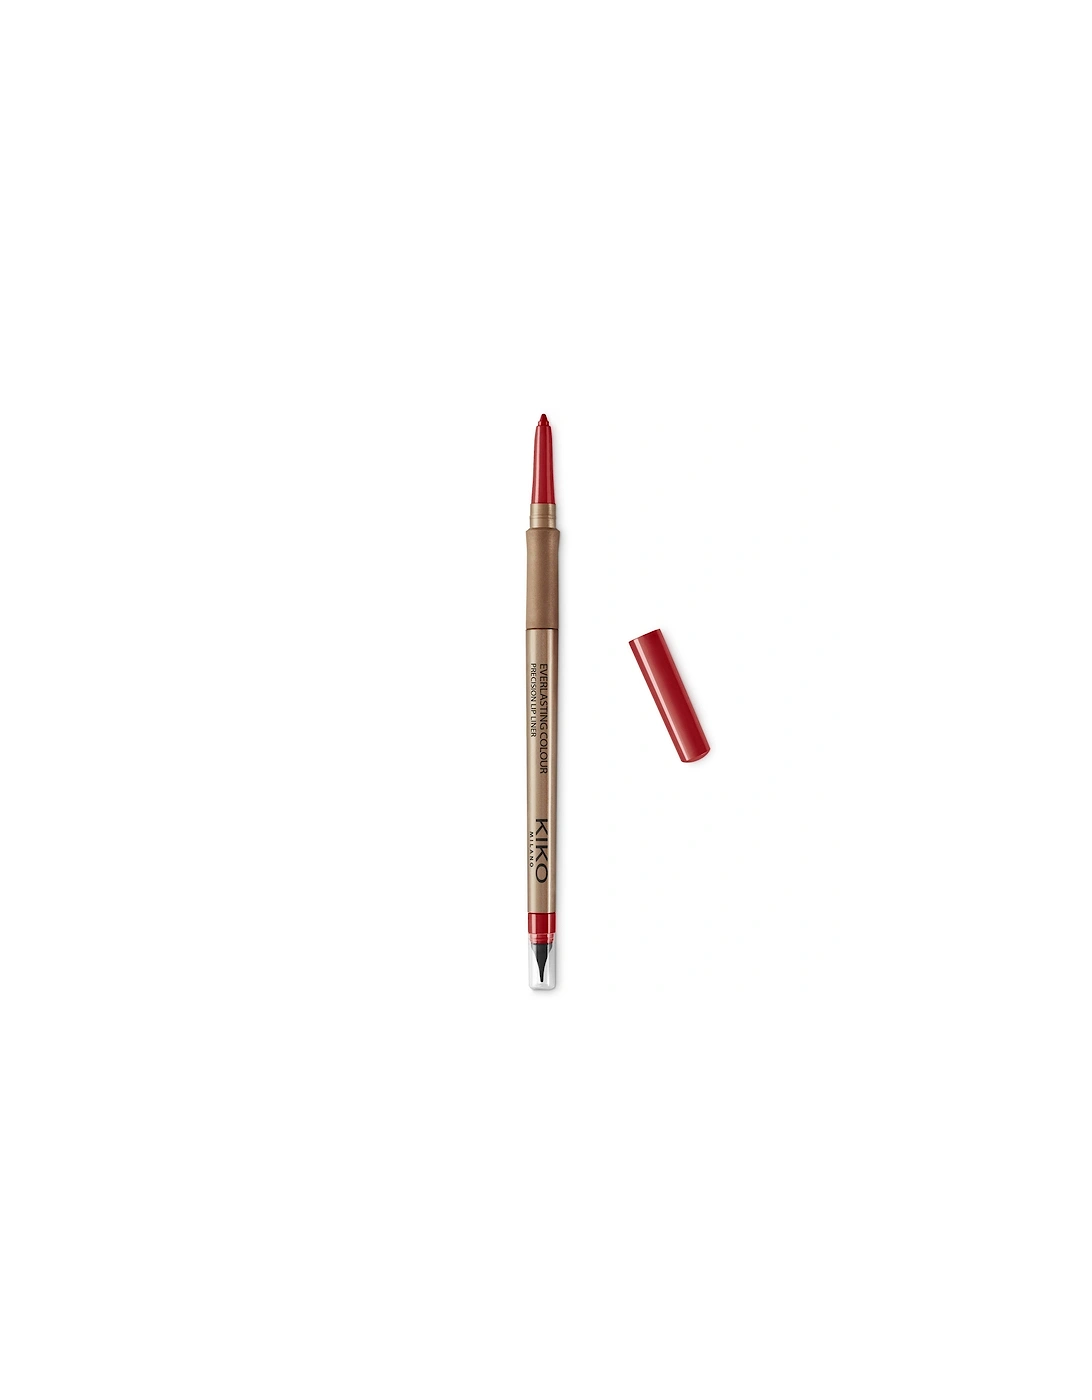 Everlasting Colour Precision Lip Liner - 16 Deep Red, 2 of 1